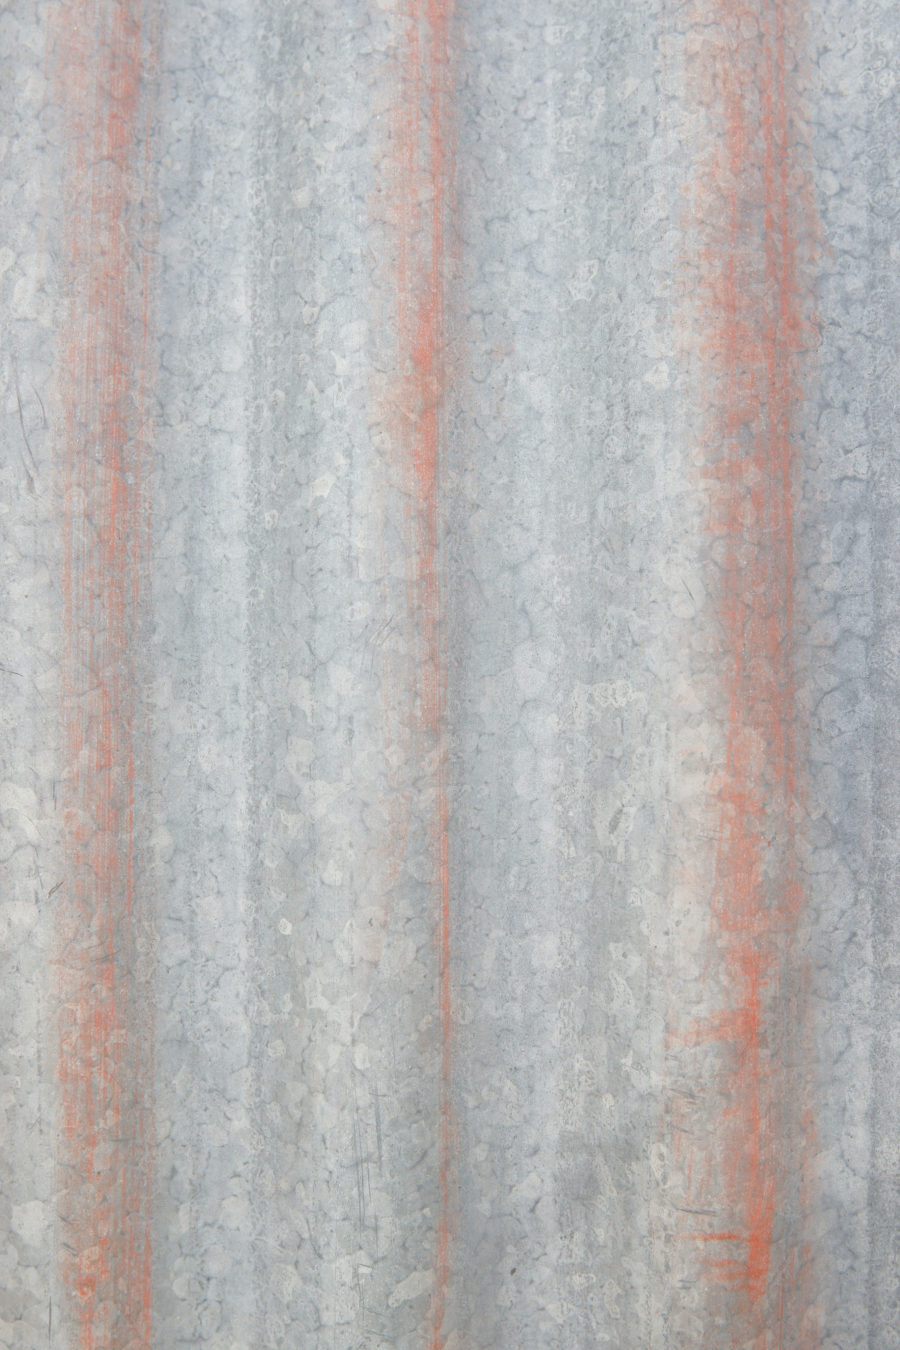 more old corrugated iron metal textures